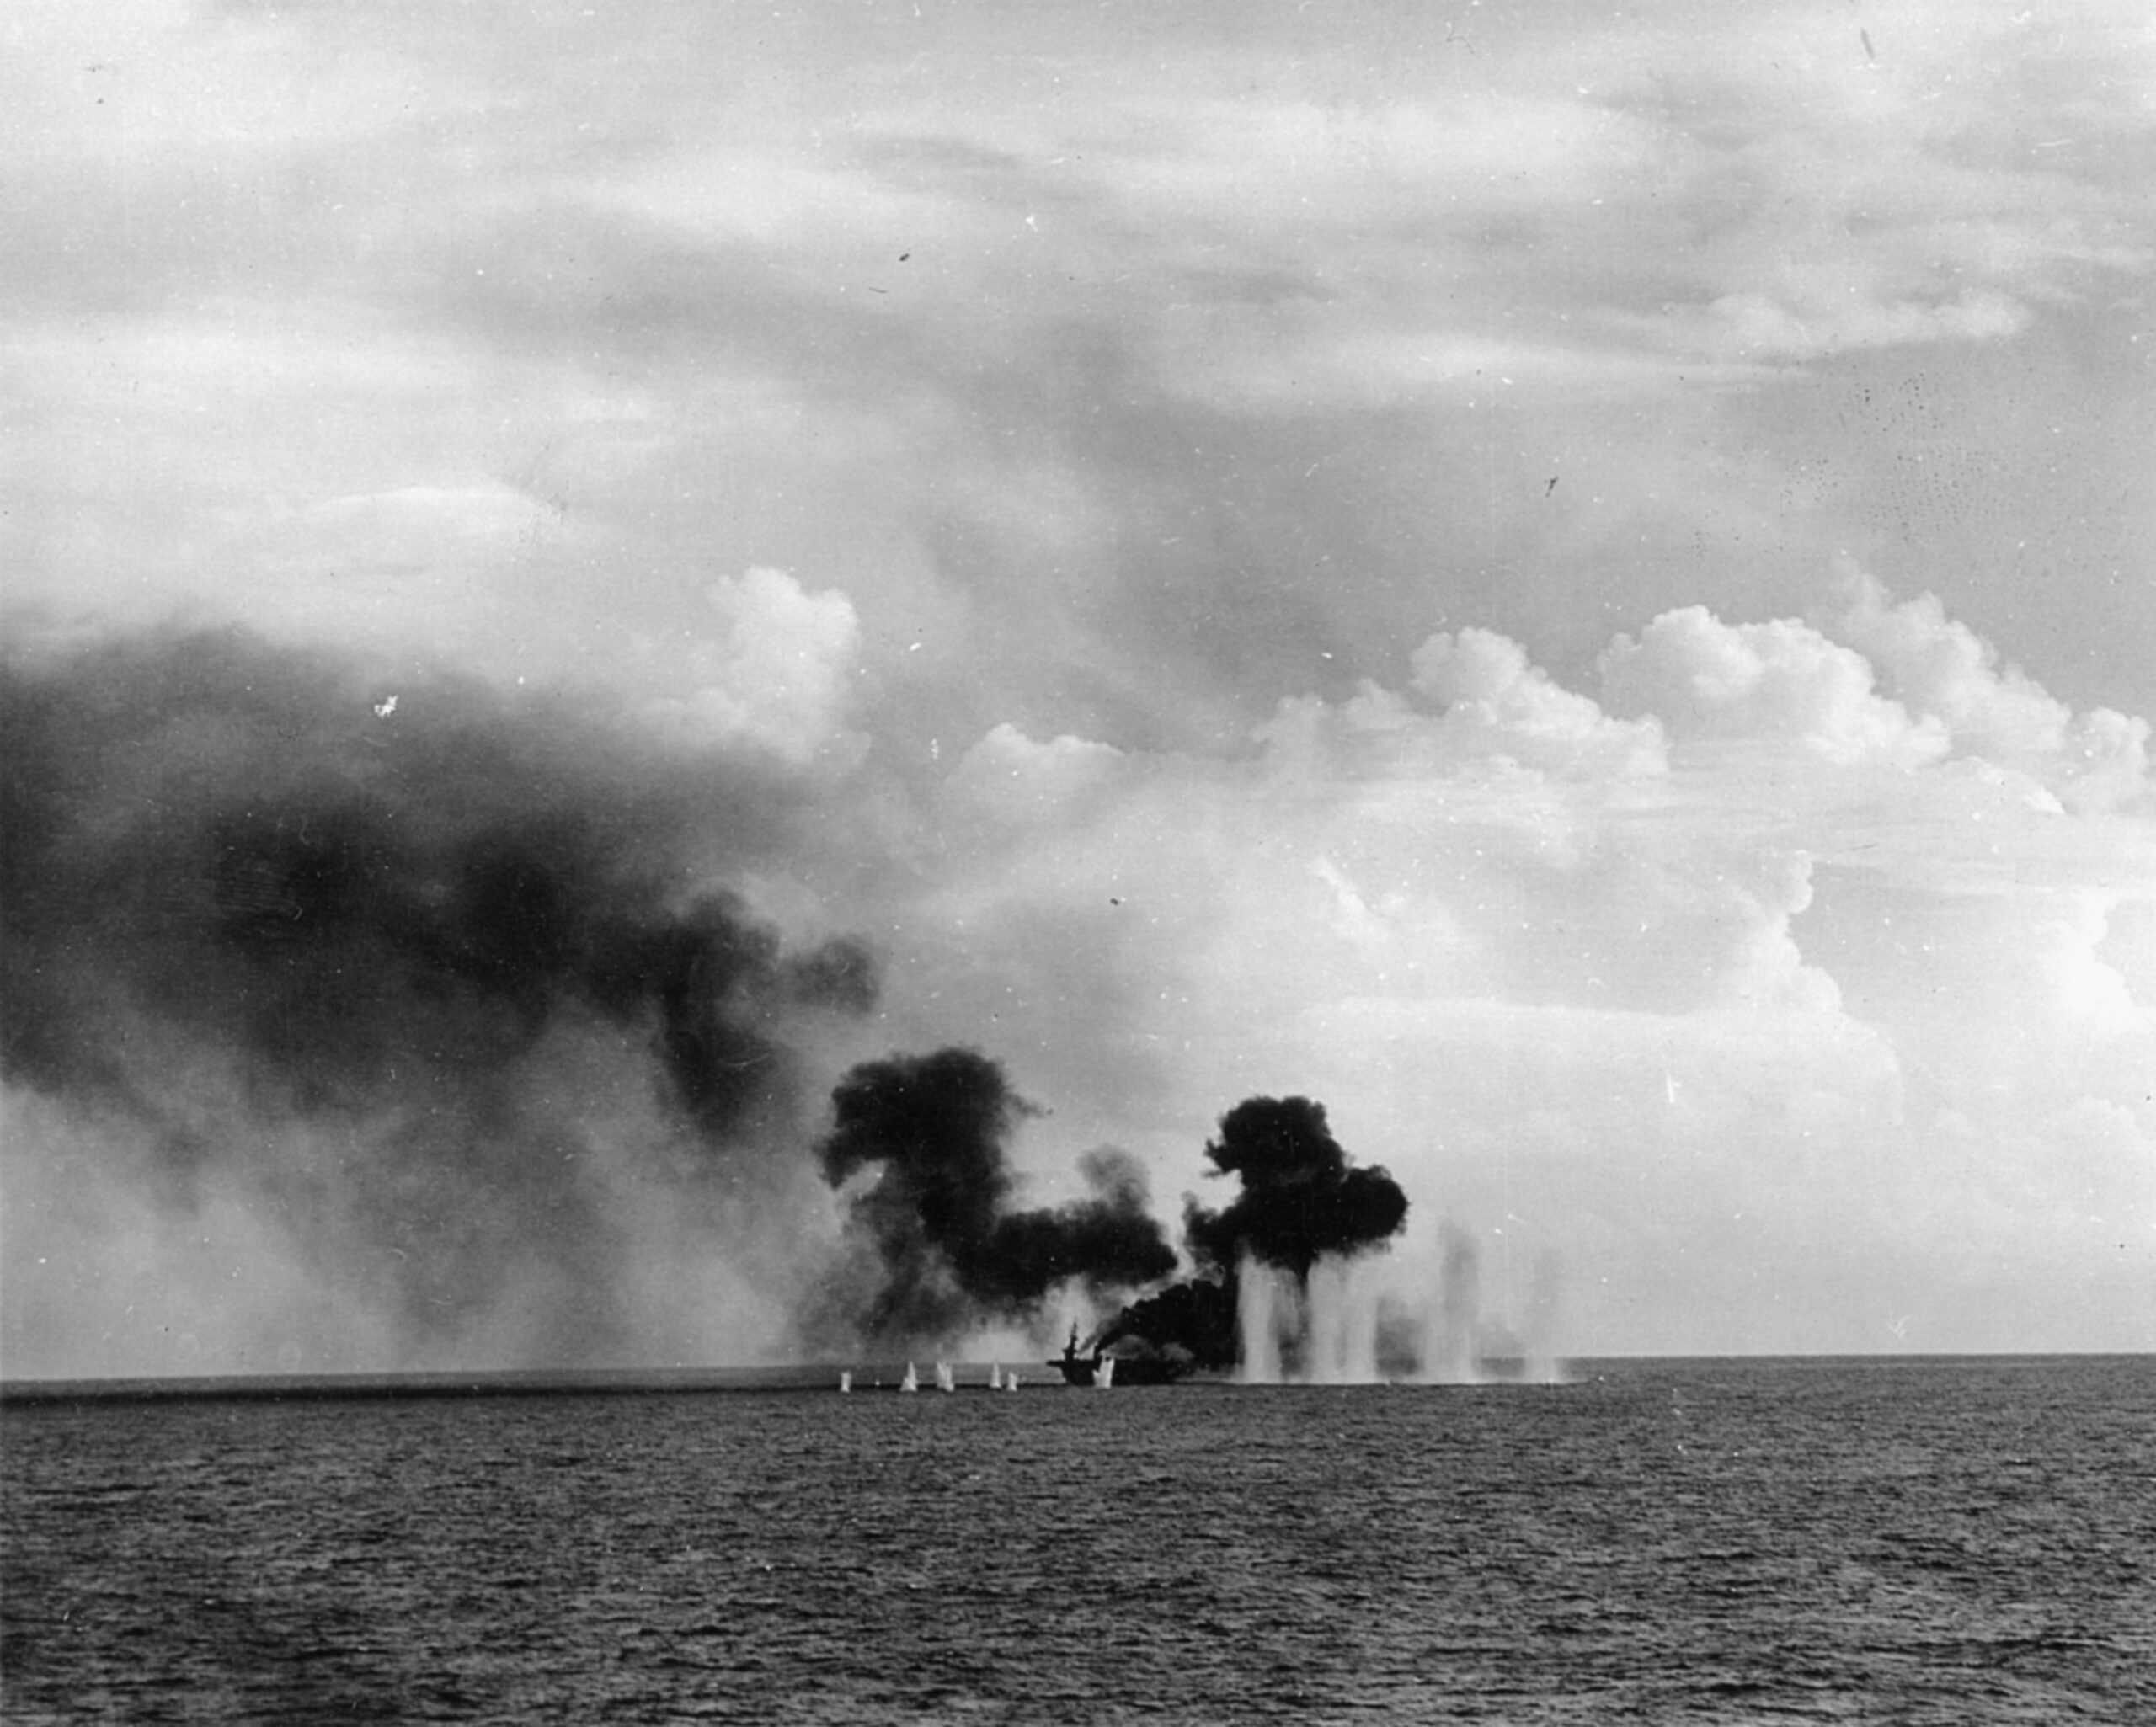 The escort carrier USS Gambier Bay is bombarded by heavy shells from Japanese cruisers. Already spewing smoke, the vessel was lost during the the fight off Samar.